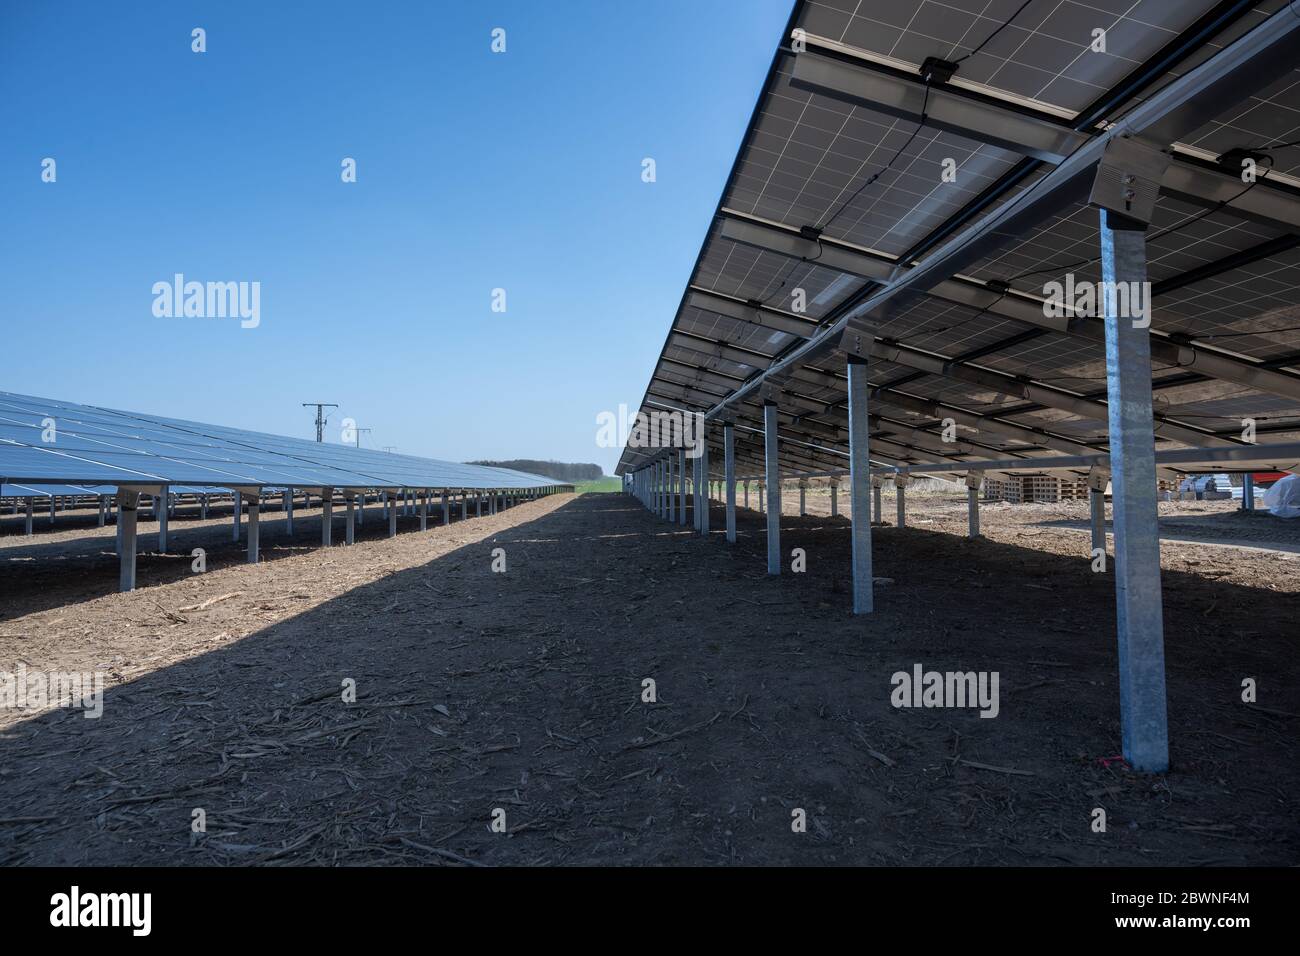 solar thermal collector field, view from below, the panels generate renewable energy by photovoltaic technology, blue sky with copy space, selected fo Stock Photo